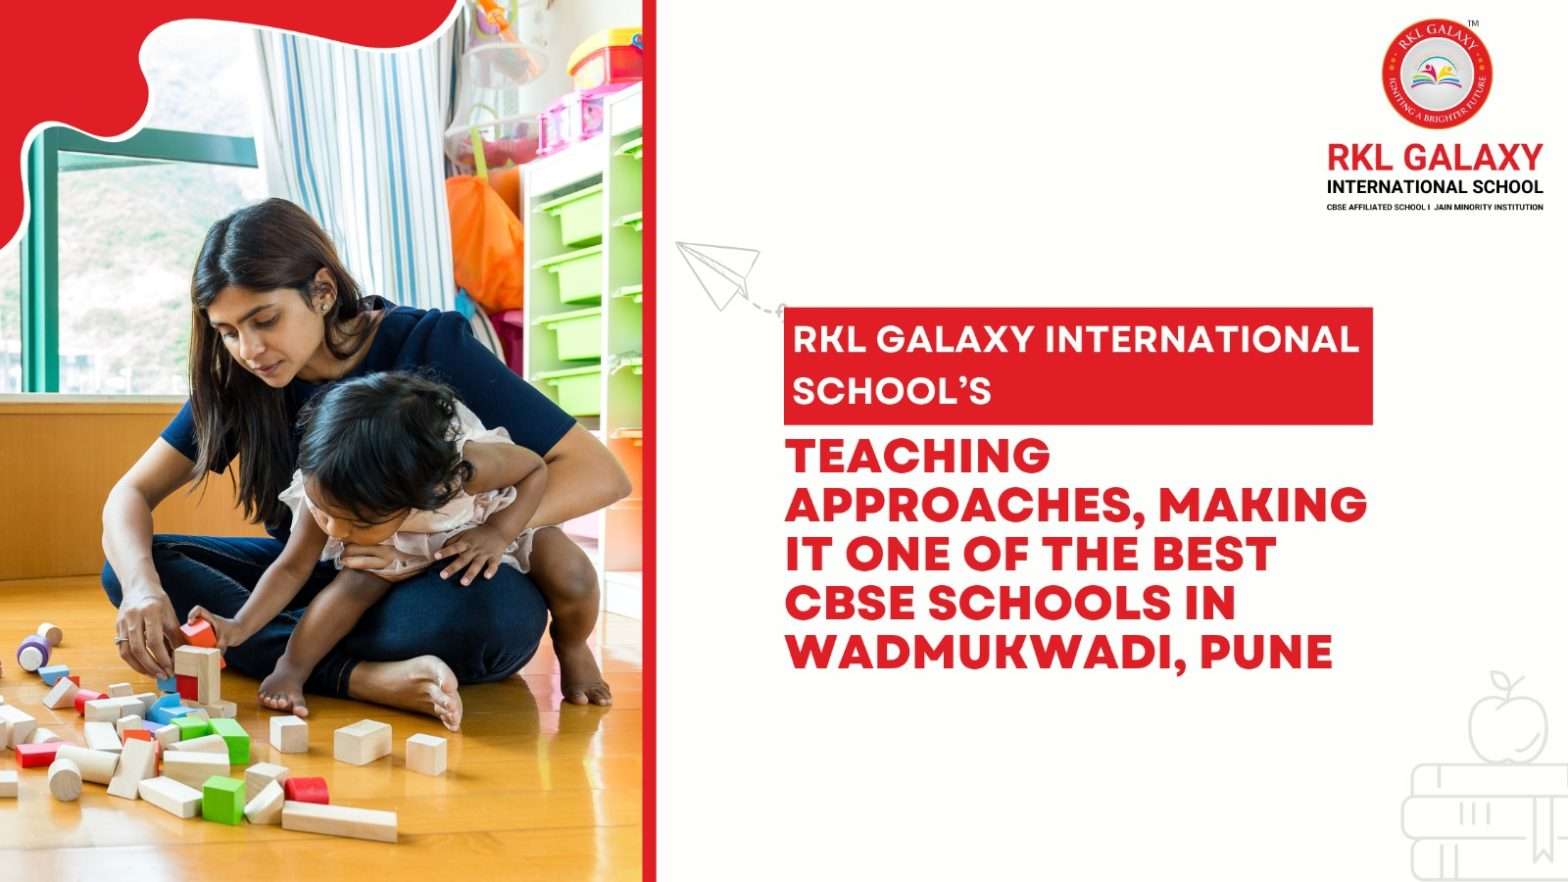 RKL Galaxy International School's Teaching Approaches, Making It One of the Best CBSE Schools in Wadmukhwadi, Pune